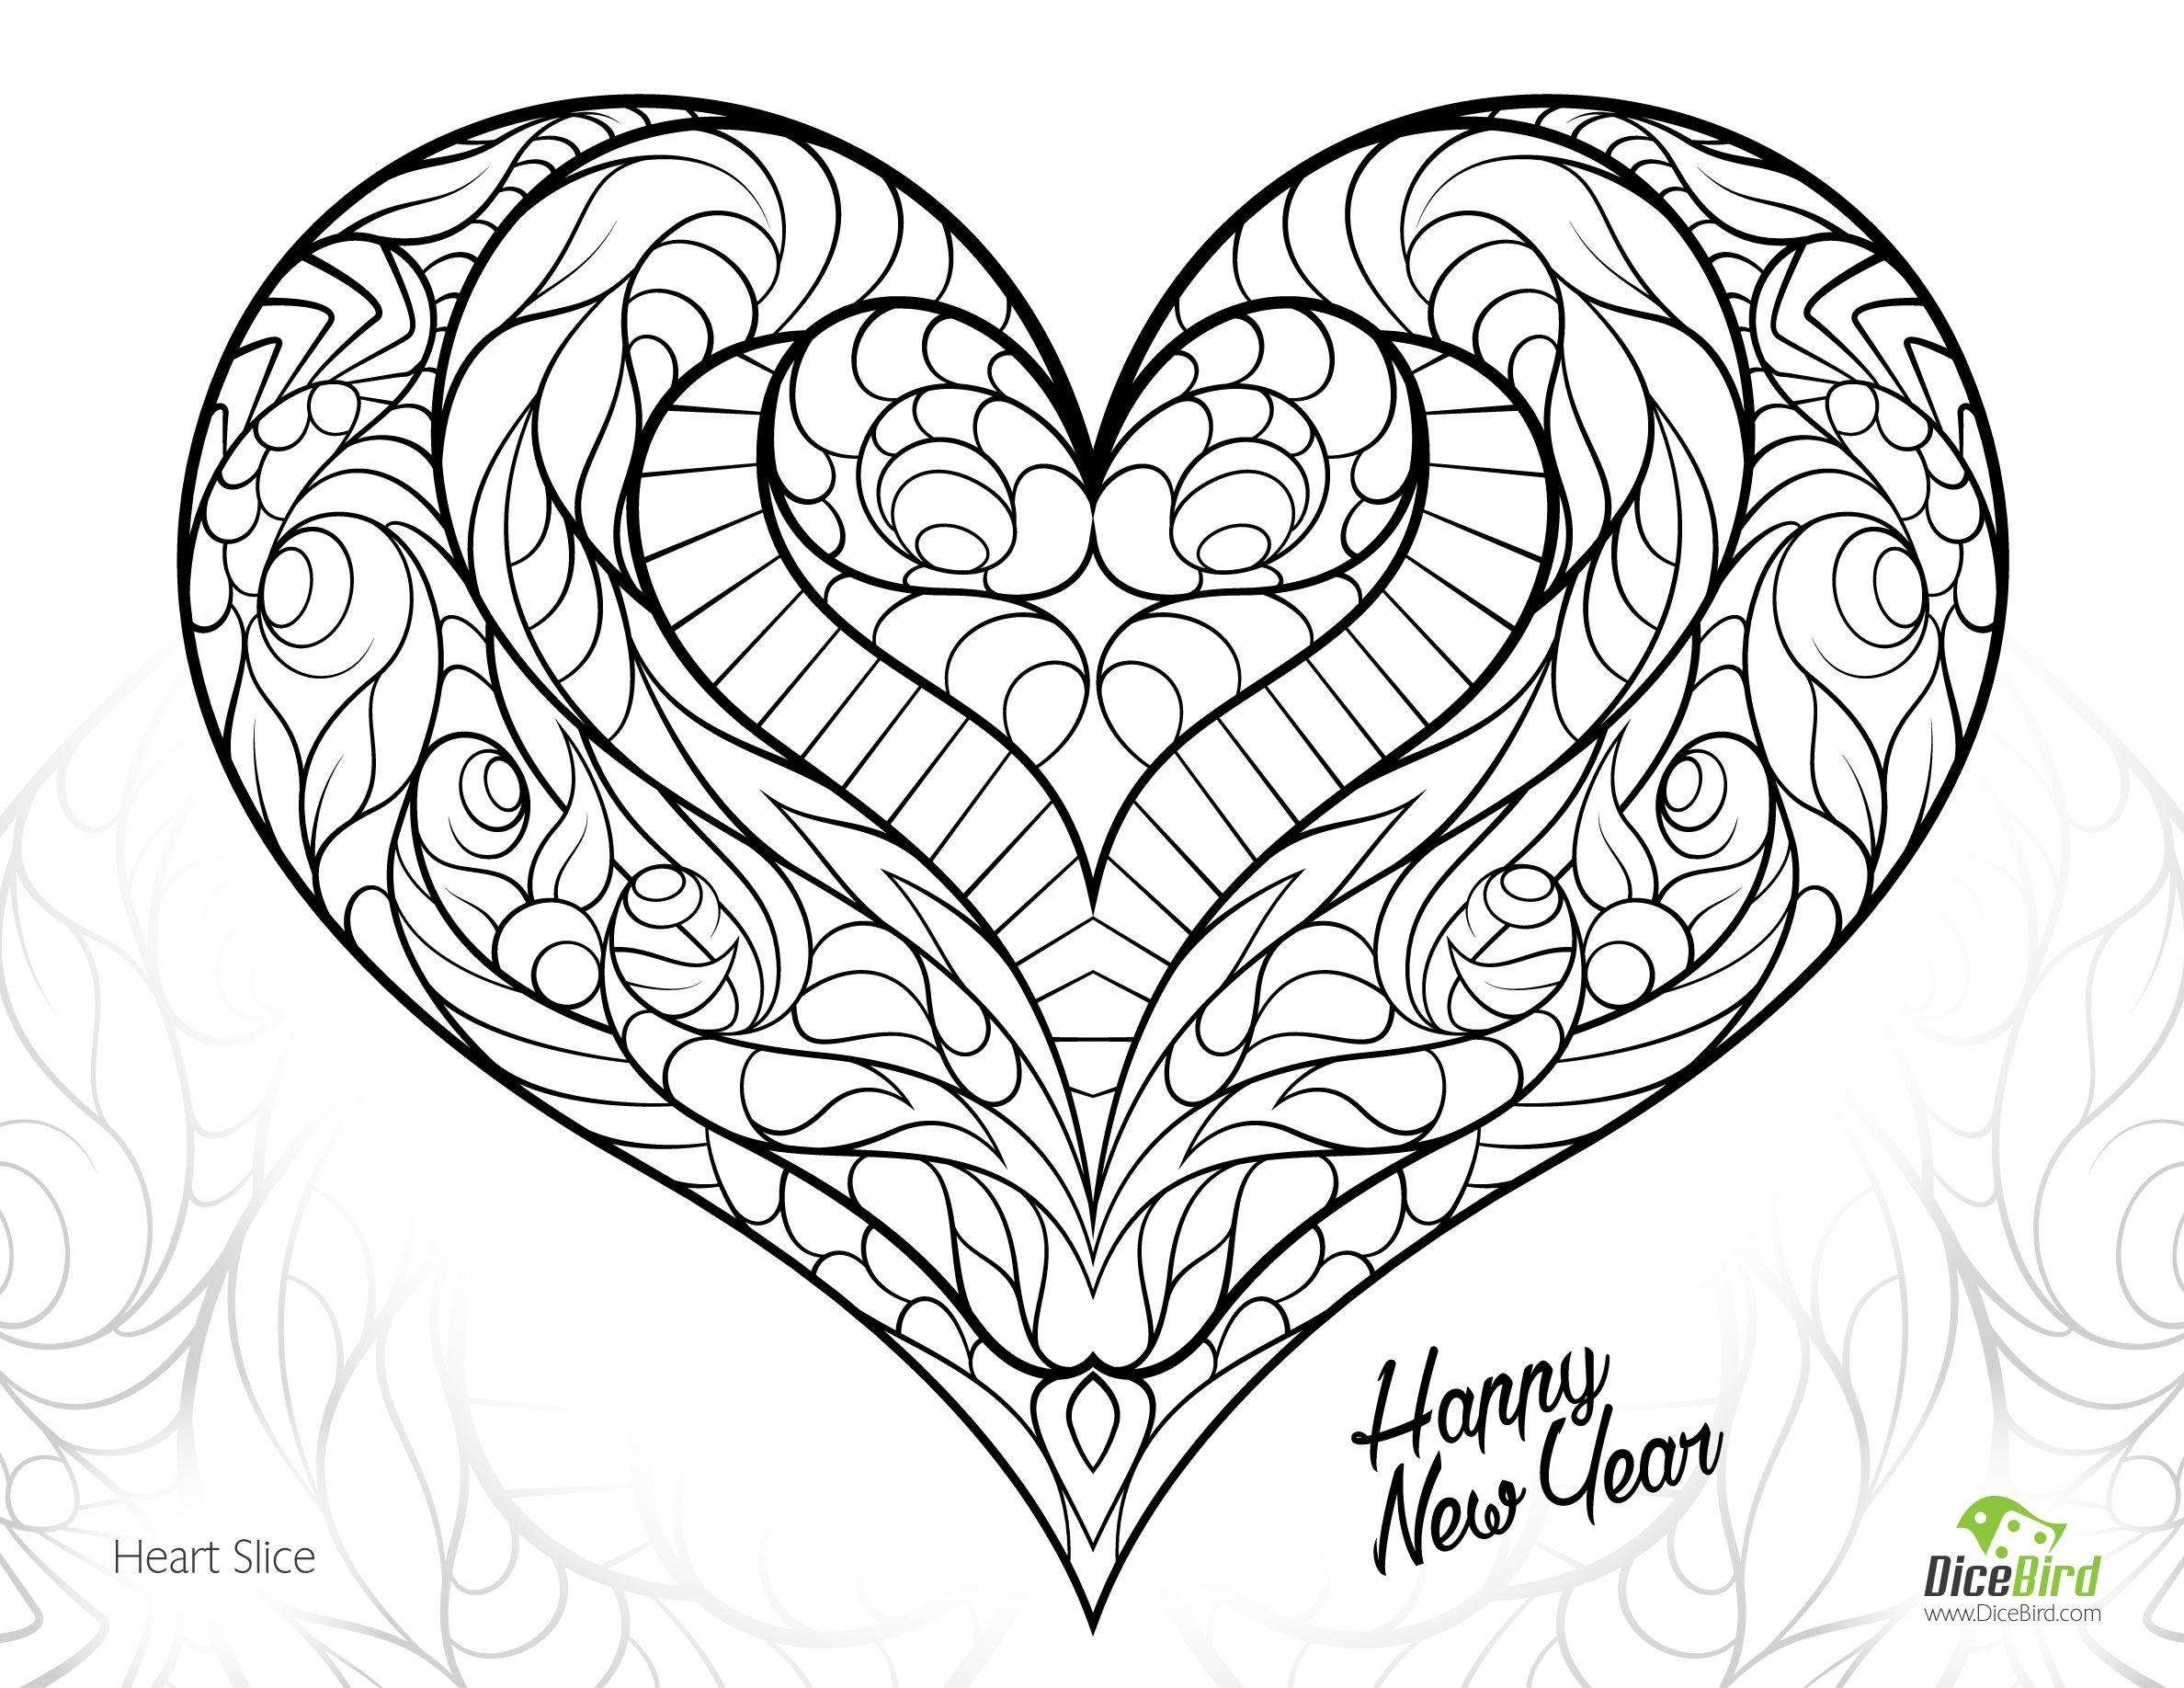 Stress Relief Coloring Pages For Adults
 Heart Slice free adult coloring pages printable